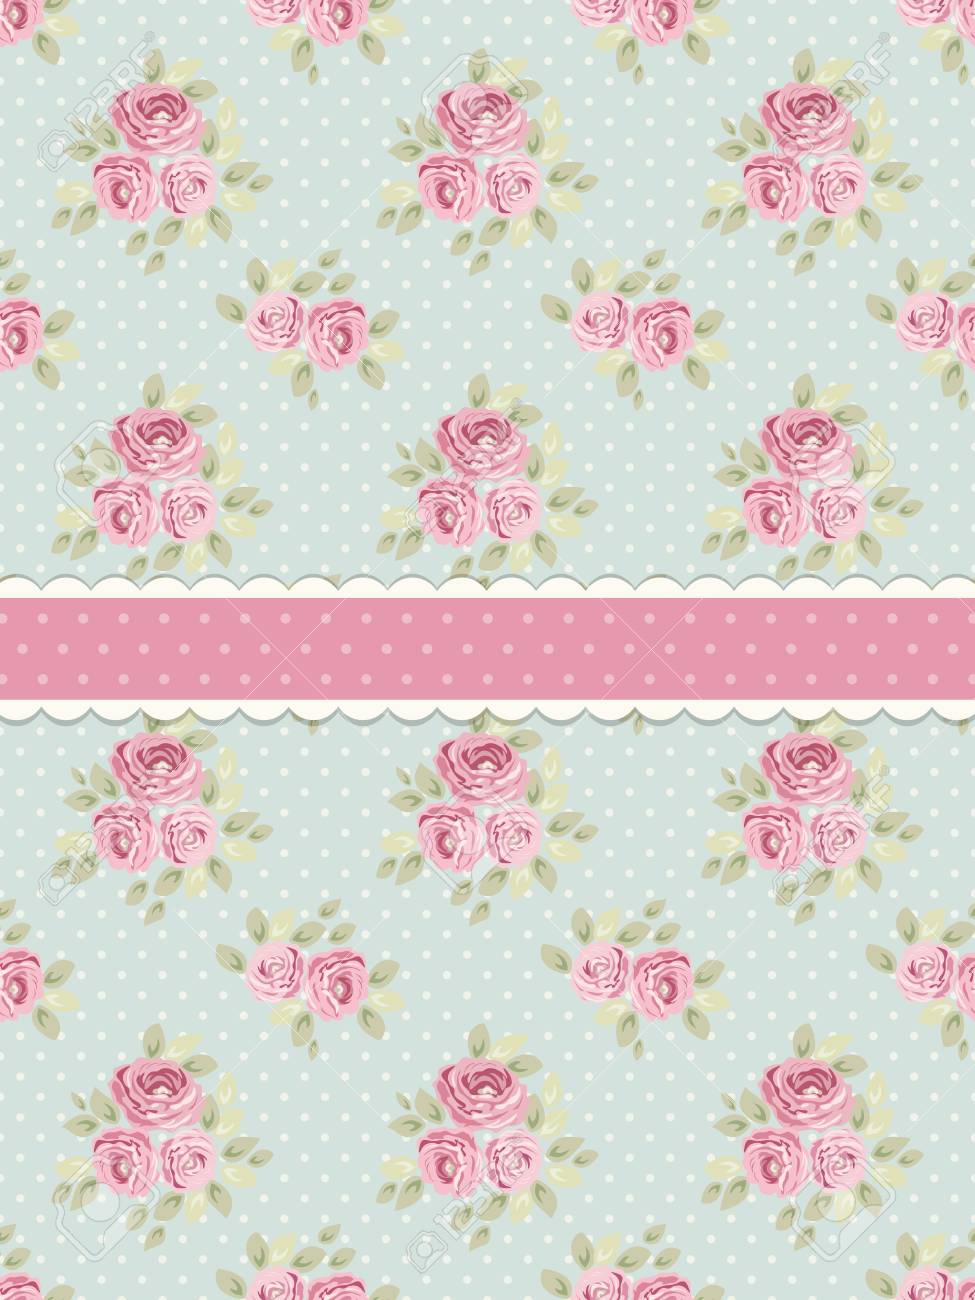 Cute Shabby Chic Background With Roses And Polka Dots Royalty